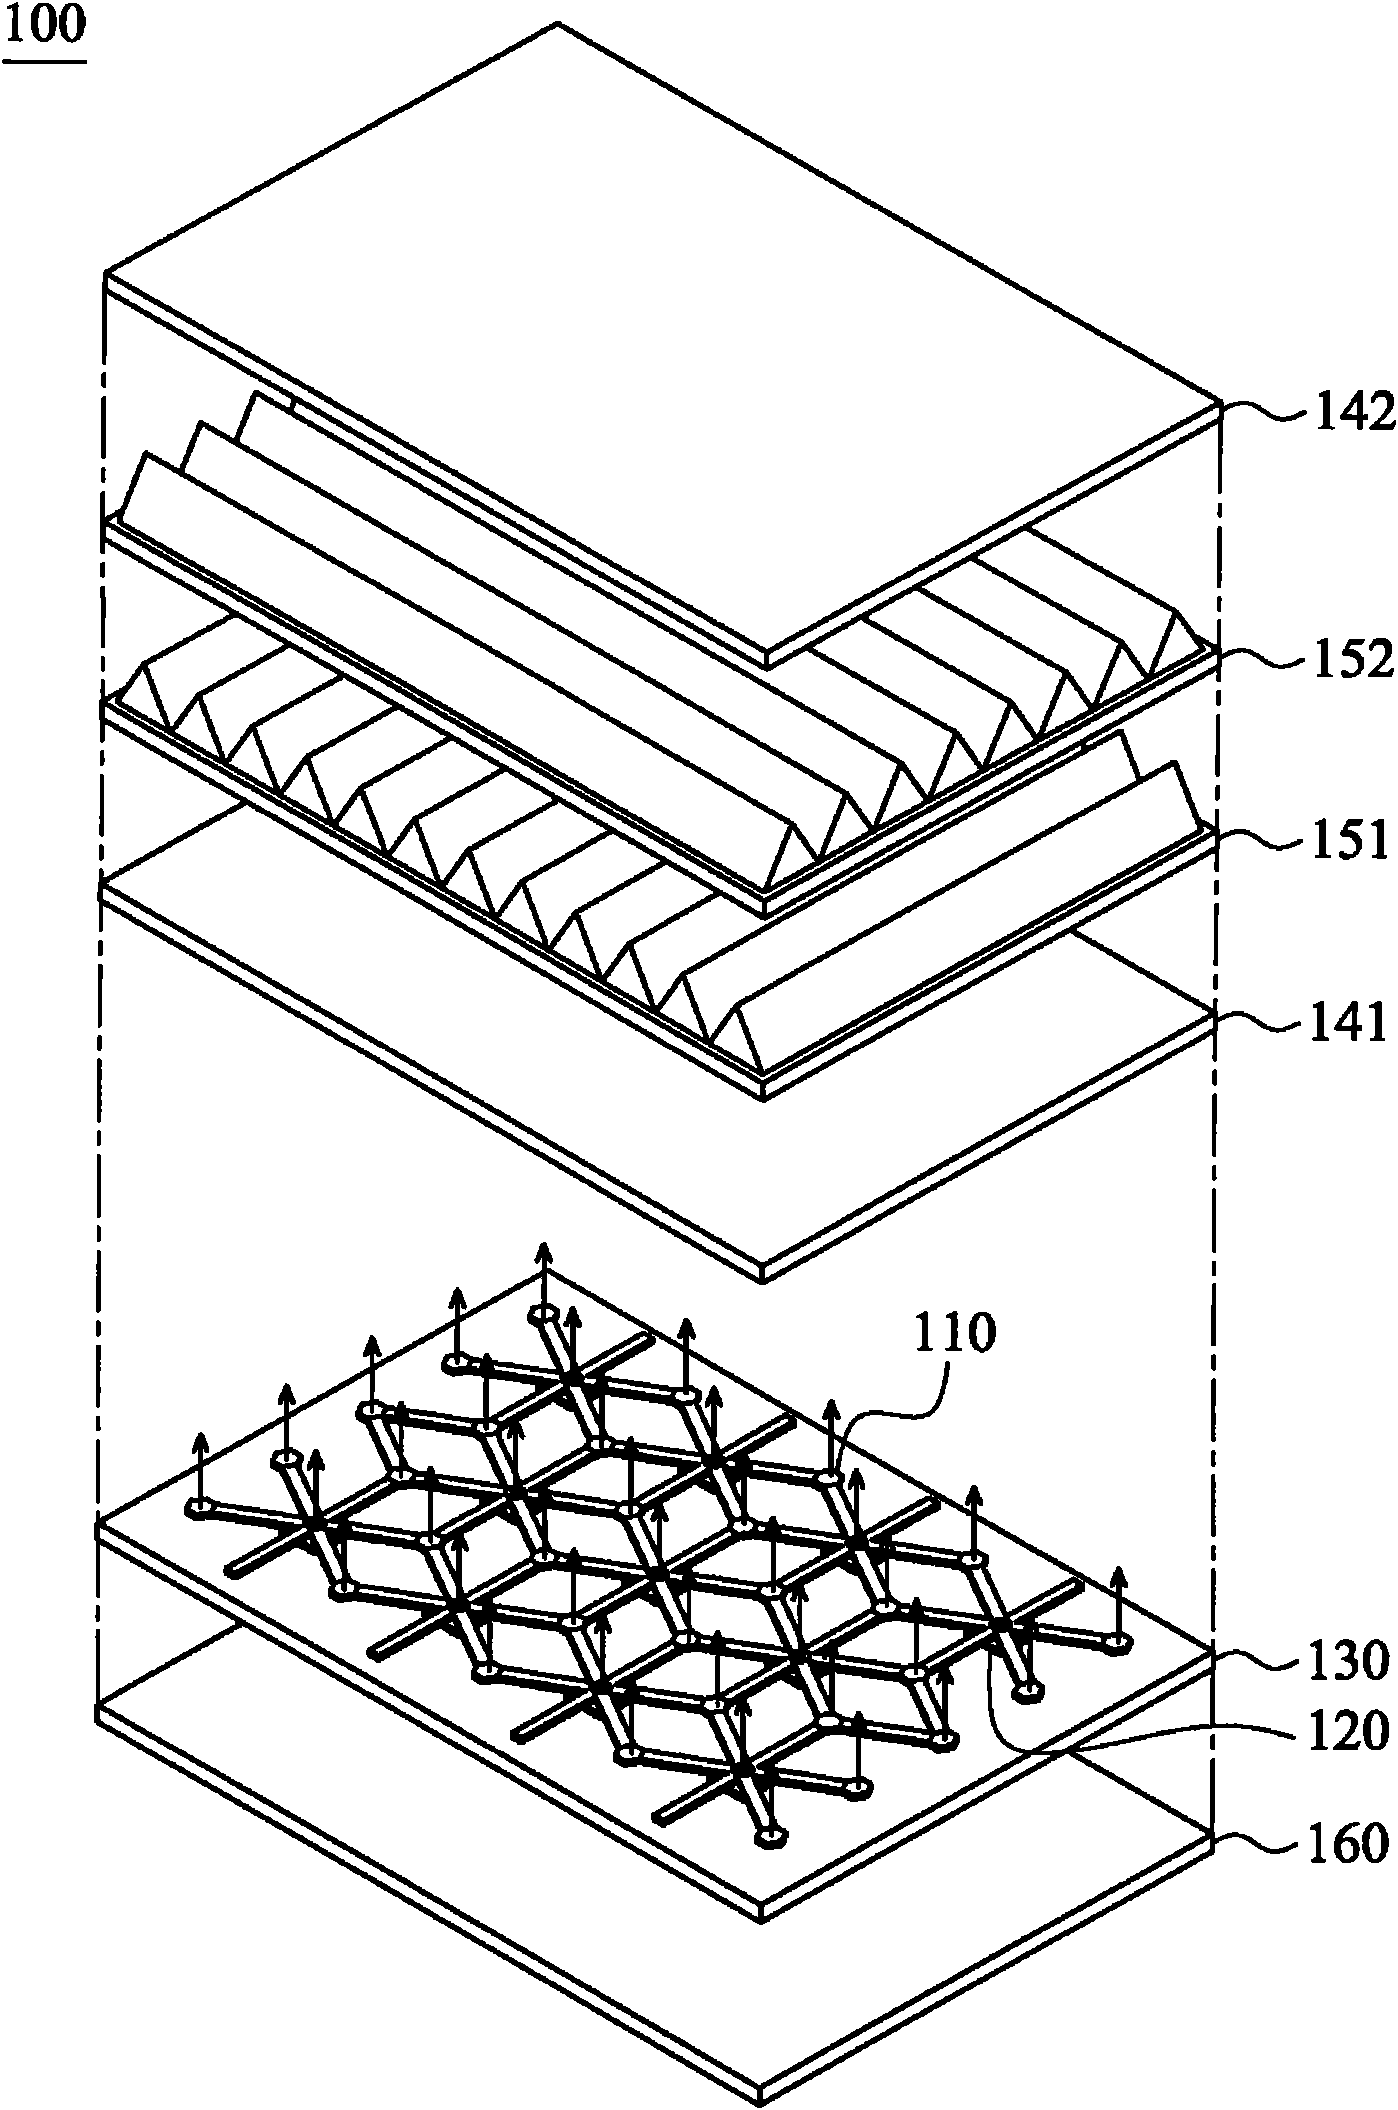 Backlight module, area light source module and light guide grid structure